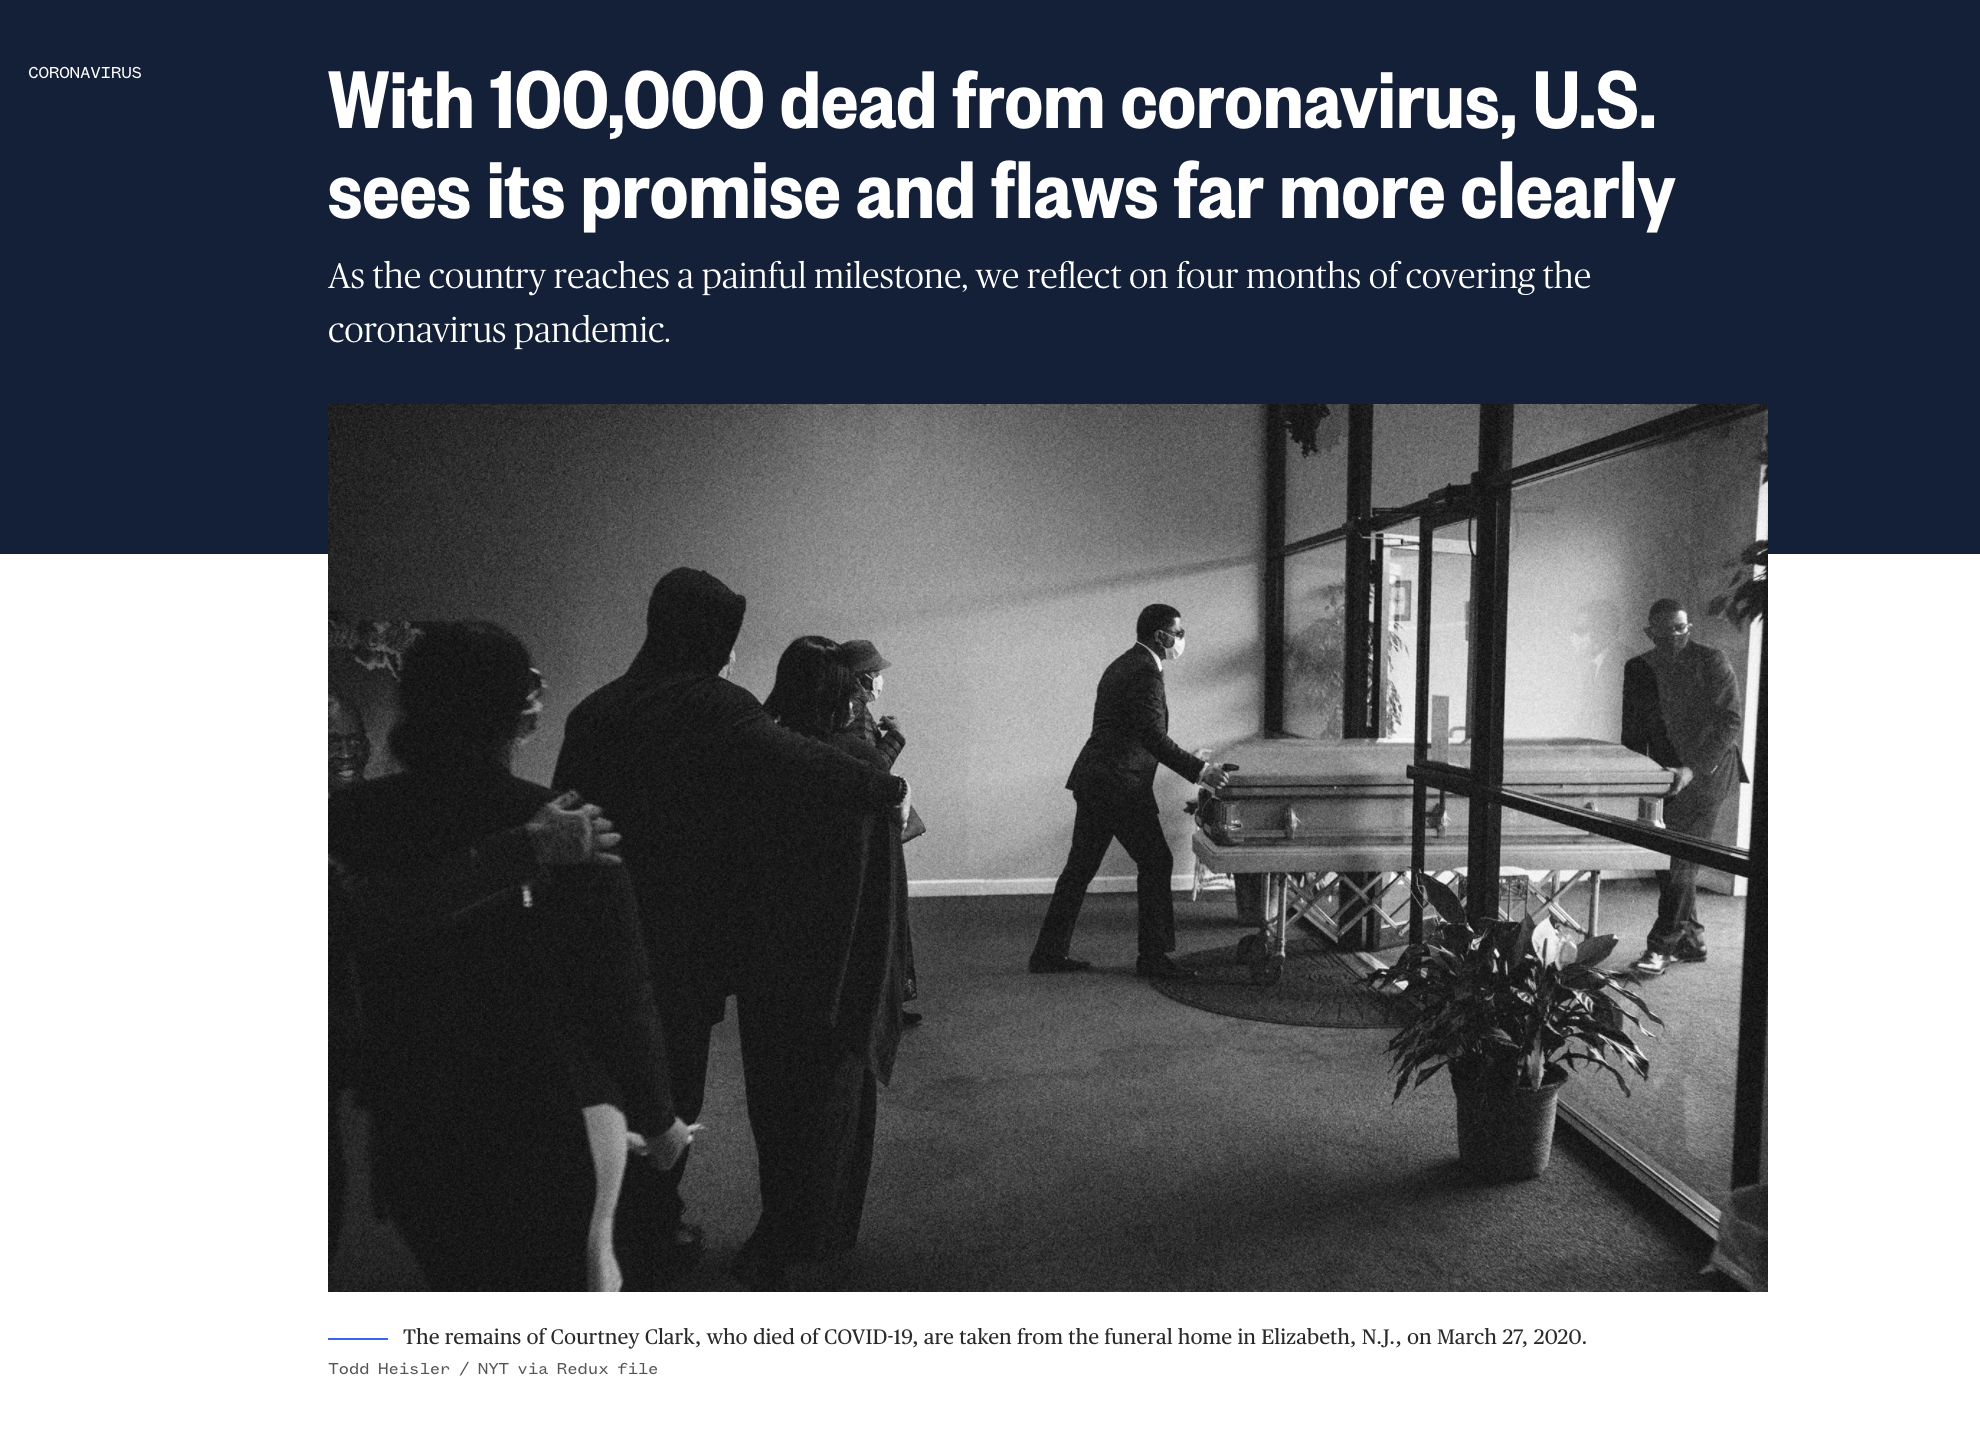   “With 100,000 dead from coronavirus, U.S. sees its promise and flaws far more clearly.”    Role: Photo select and edit 